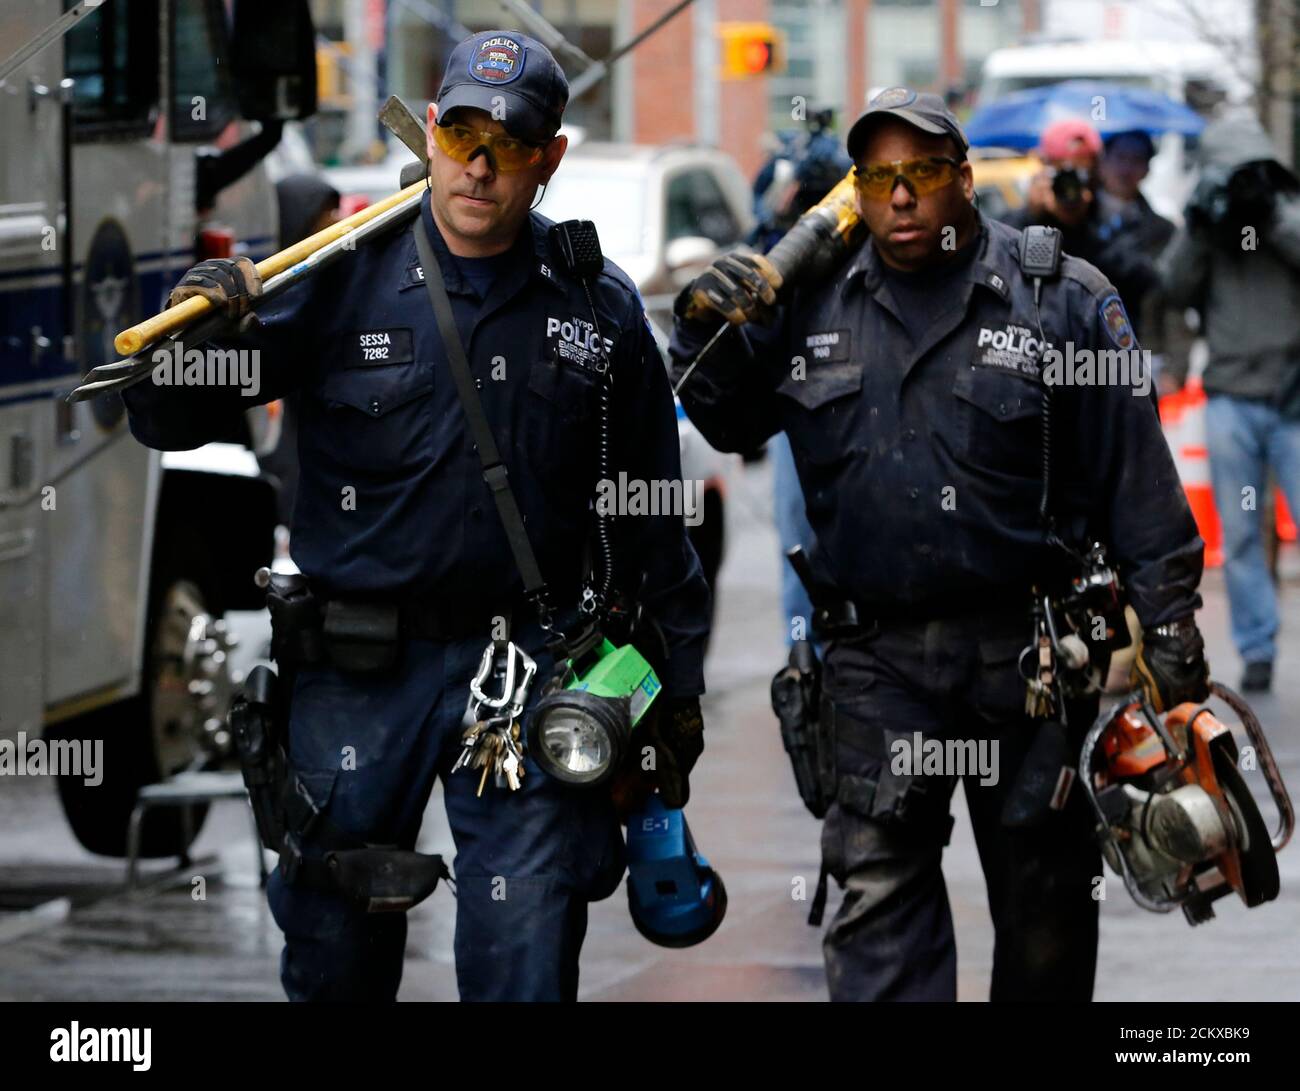 Members of the New York Police Department Emergency Service Unit exit 51 Park Place in New York, April 29, 2013. A Boeing representative confirmed to the New York Police Department that wreckage discovered last week, in a narrow alleyway behind 51 Park Place and 50 Murray Street in Manhattan's financial district, 'is believed to be from one of the two aircraft destroyed on September 11, 2001, but it could not be determined which one,' Paul Browne, NYPD's chief spokesman, said on Monday.  REUTERS/Brendan McDermid (UNITED STATES  - Tags: TRANSPORT DISASTER CRIME LAW) Stock Photo